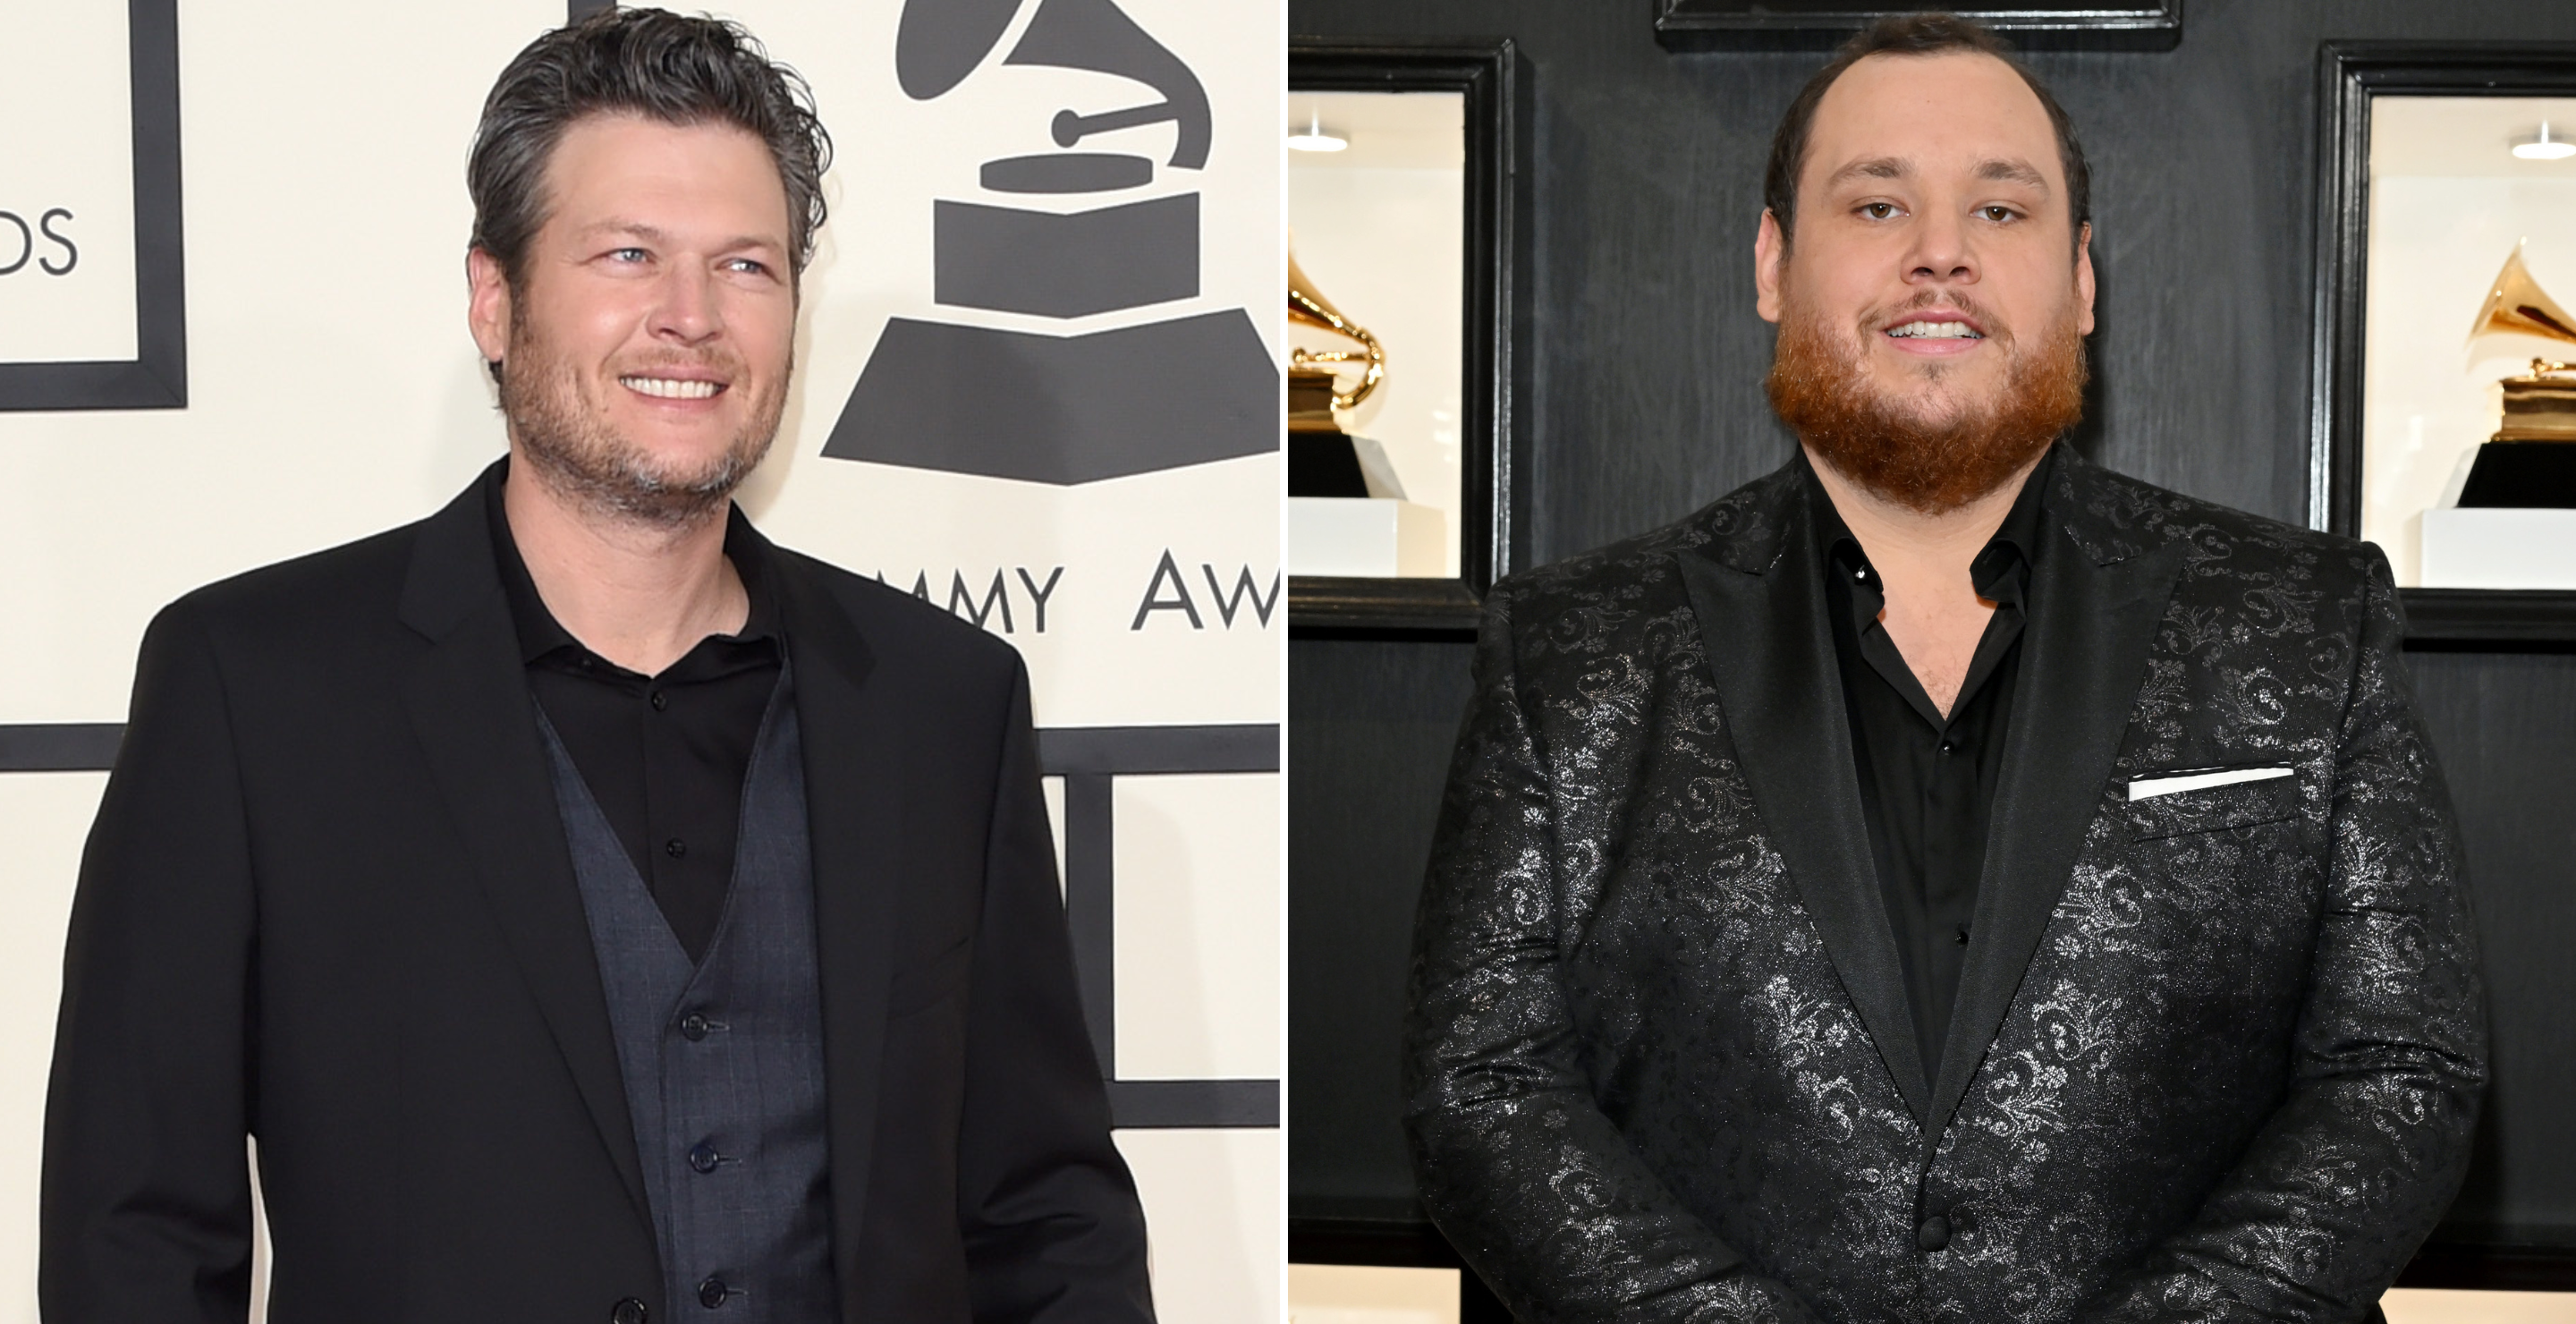 LOS ANGELES, CA - FEBRUARY 08: Recording artist Blake Shelton attends The 57th Annual GRAMMY Awards at the STAPLES Center on February 8, 2015 in Los Angeles, California and LOS ANGELES, CALIFORNIA - FEBRUARY 05: Luke Combs attends the 65th GRAMMY Awards on February 05, 2023 in Los Angeles, California.